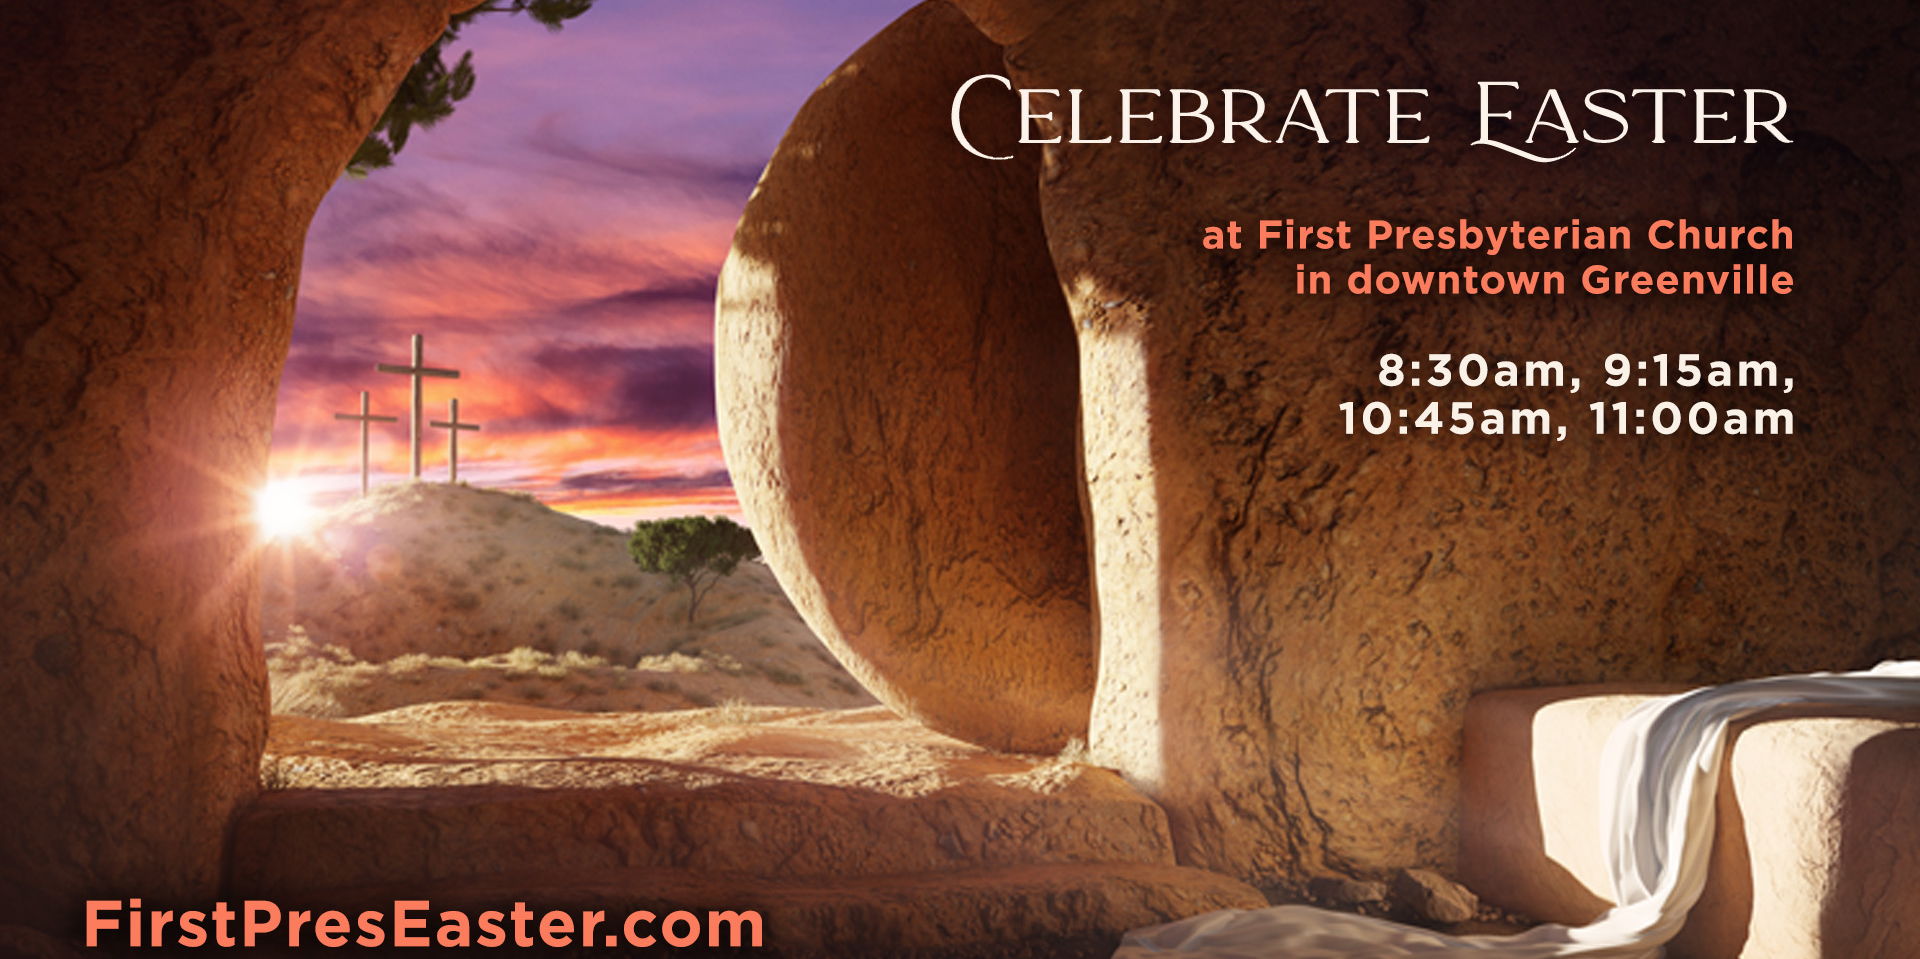 Holy Week & Easter at First Presbyterian Church  promotional image